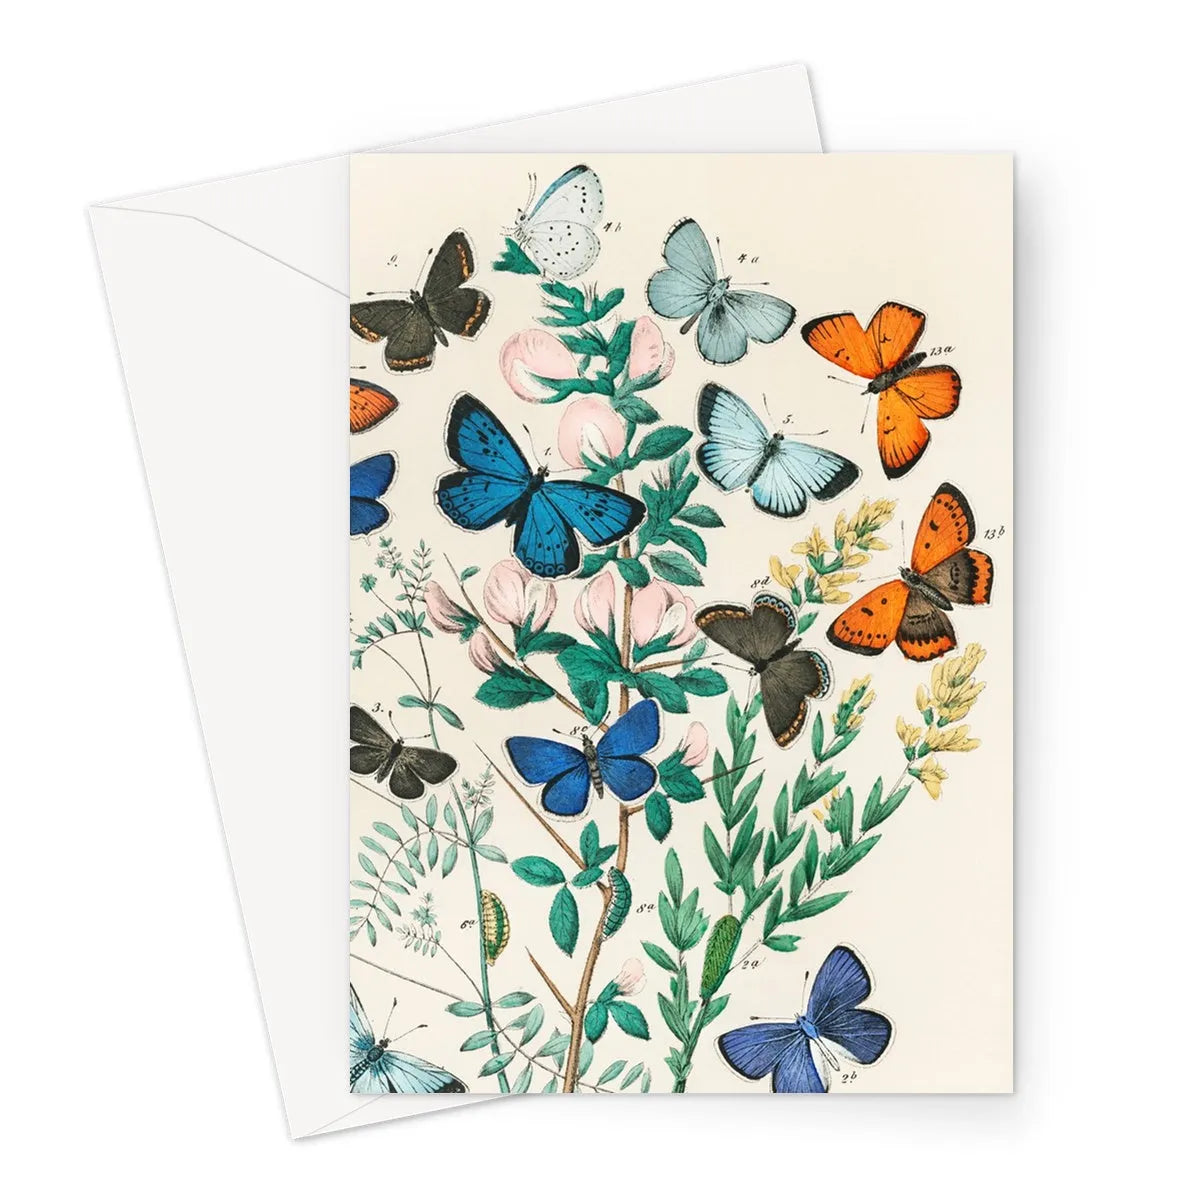 European Butterflies And Moths By William Forsell Kirby Greeting Card - A5 Portrait / 1 Card - Greeting & Note Cards